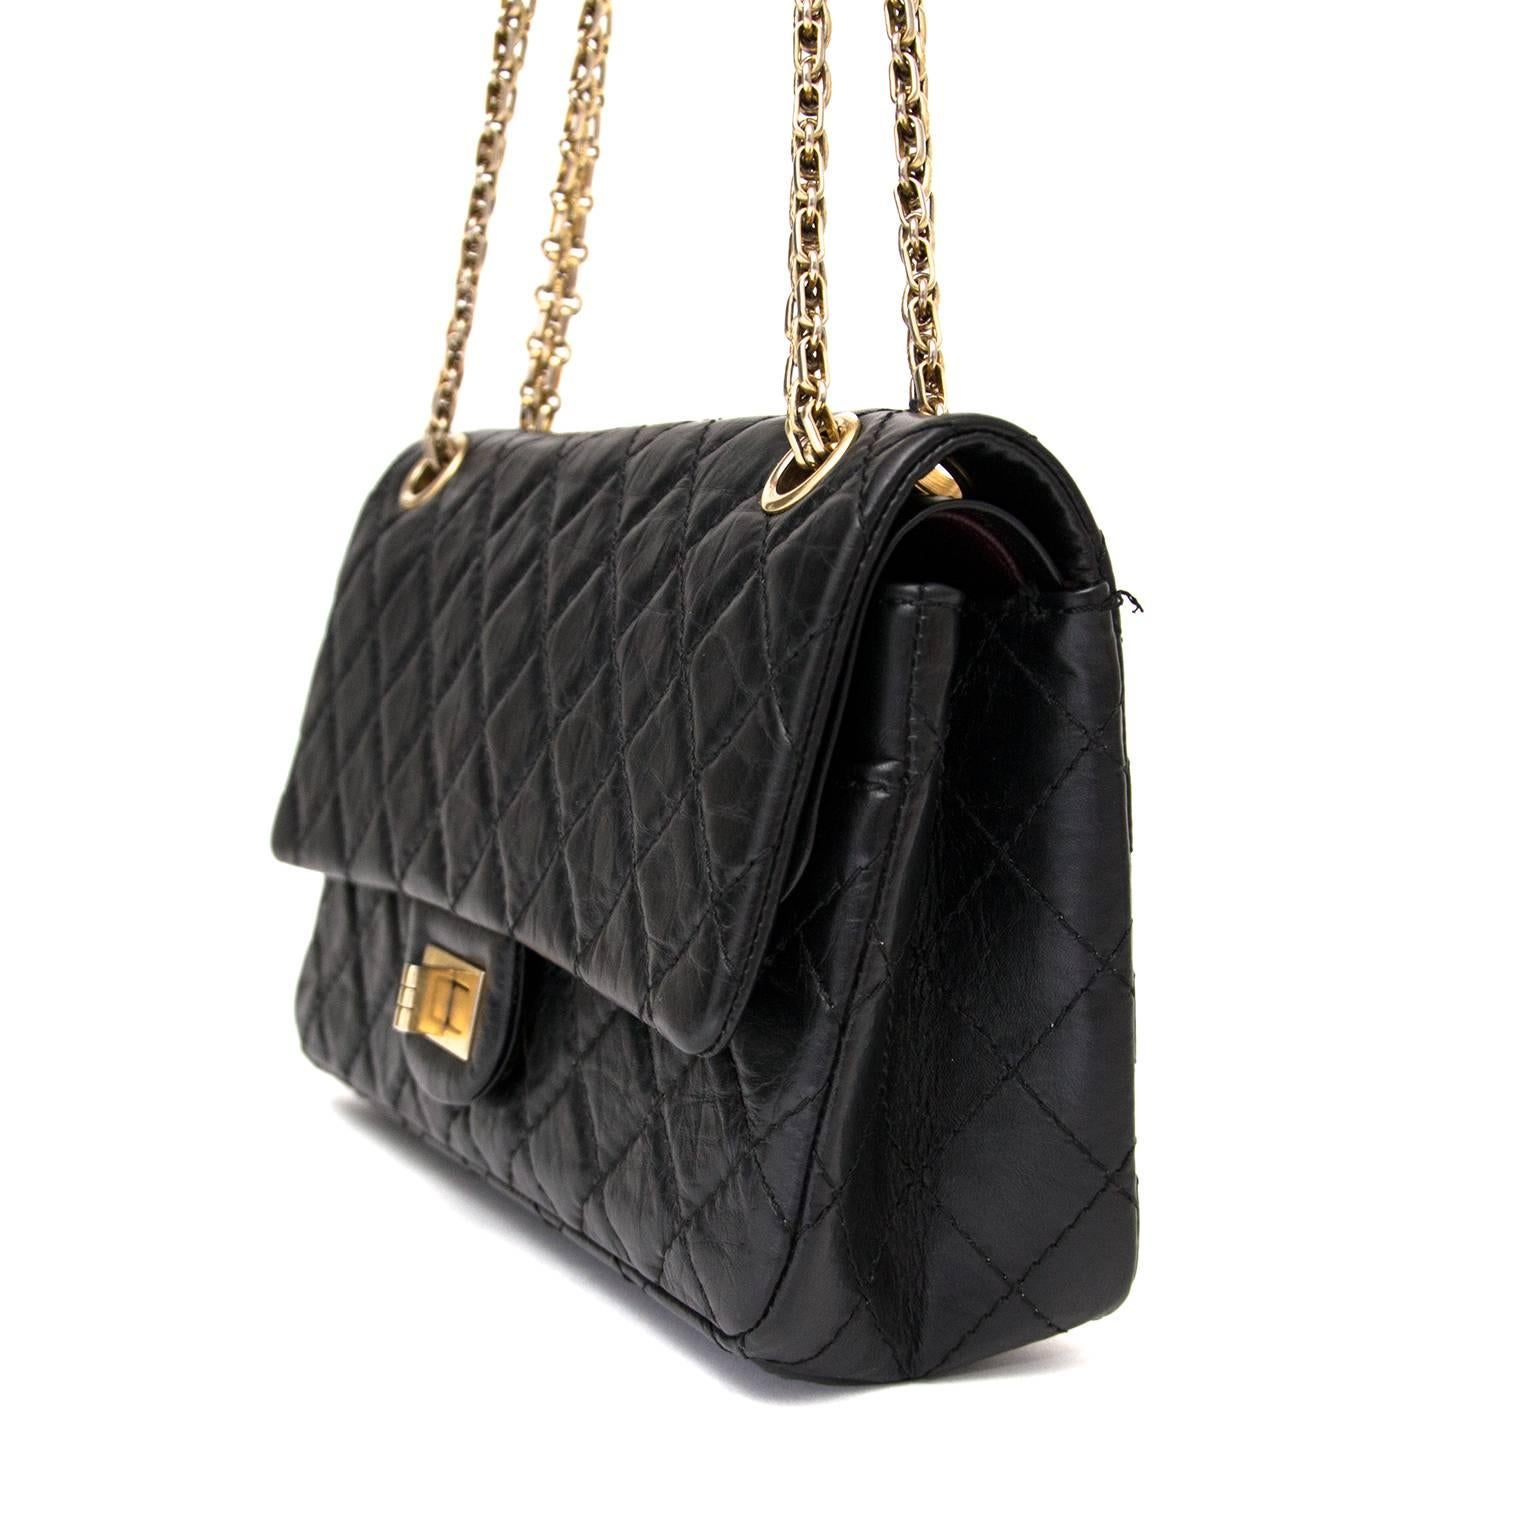 This charming Chanel 2.55 reissue bag comes in classic black with gold hardware. This is a true classic investment piece and a must for every woman. The bag is just large enough for all your essentials. This beautiful bag showcases signature